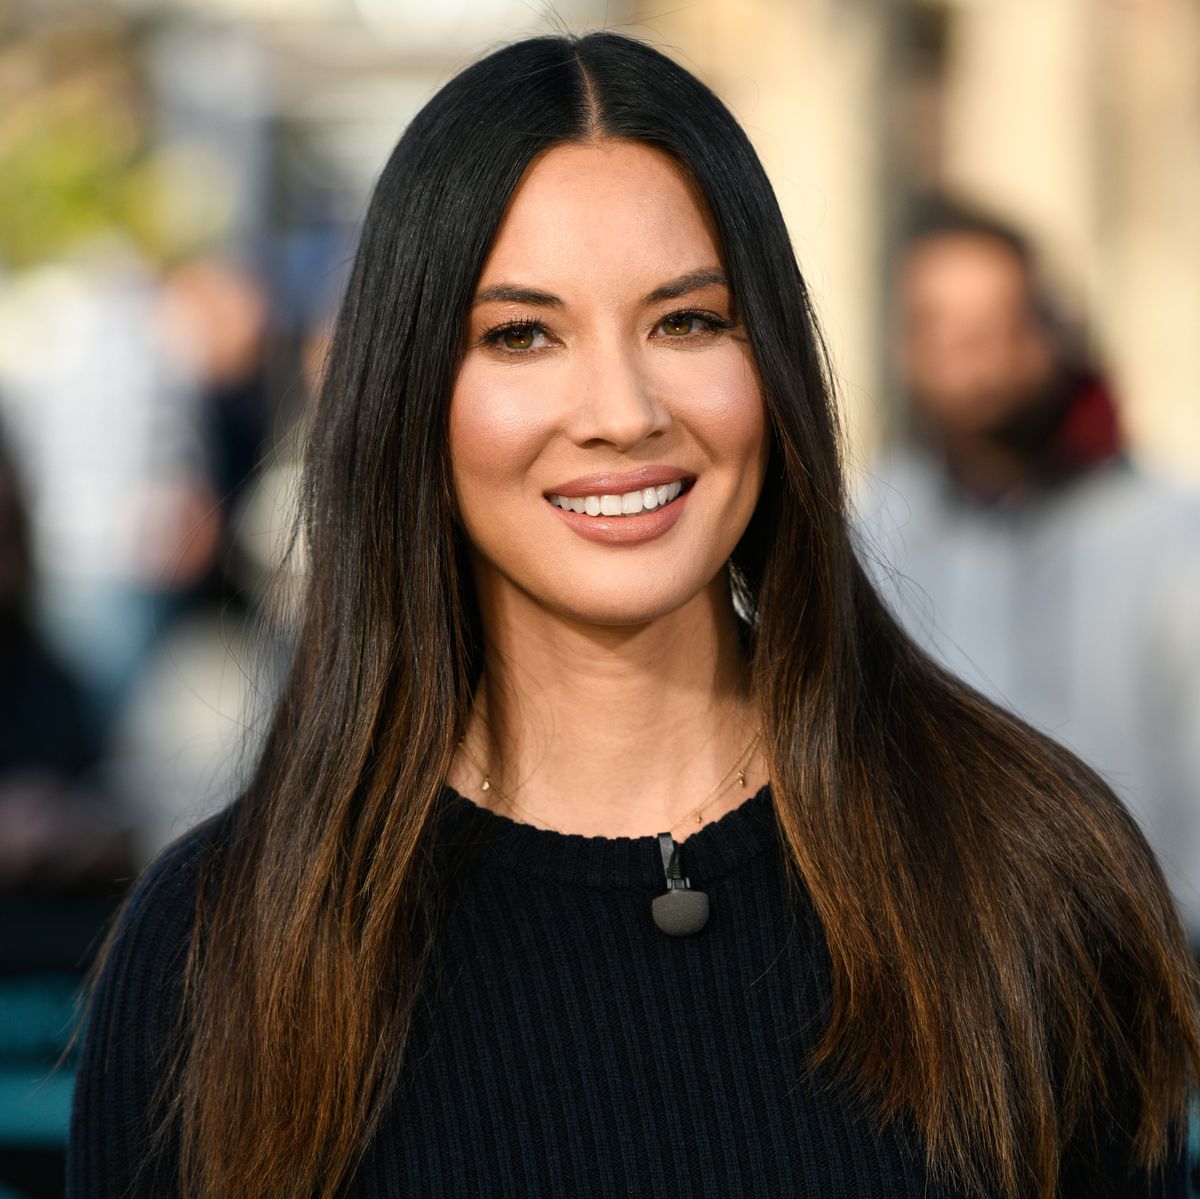 The Cast of "The Talk" and Olivia Munn Visit "Extra"UNIVERSAL CITY, CALIFORNIA - FEBRUARY 19: Olivia Munn visits "Extra" at Universal Studios Hollywood on February 19, 2019 in Universal City, California. (Photo by Noel Vasquez/Getty Images)